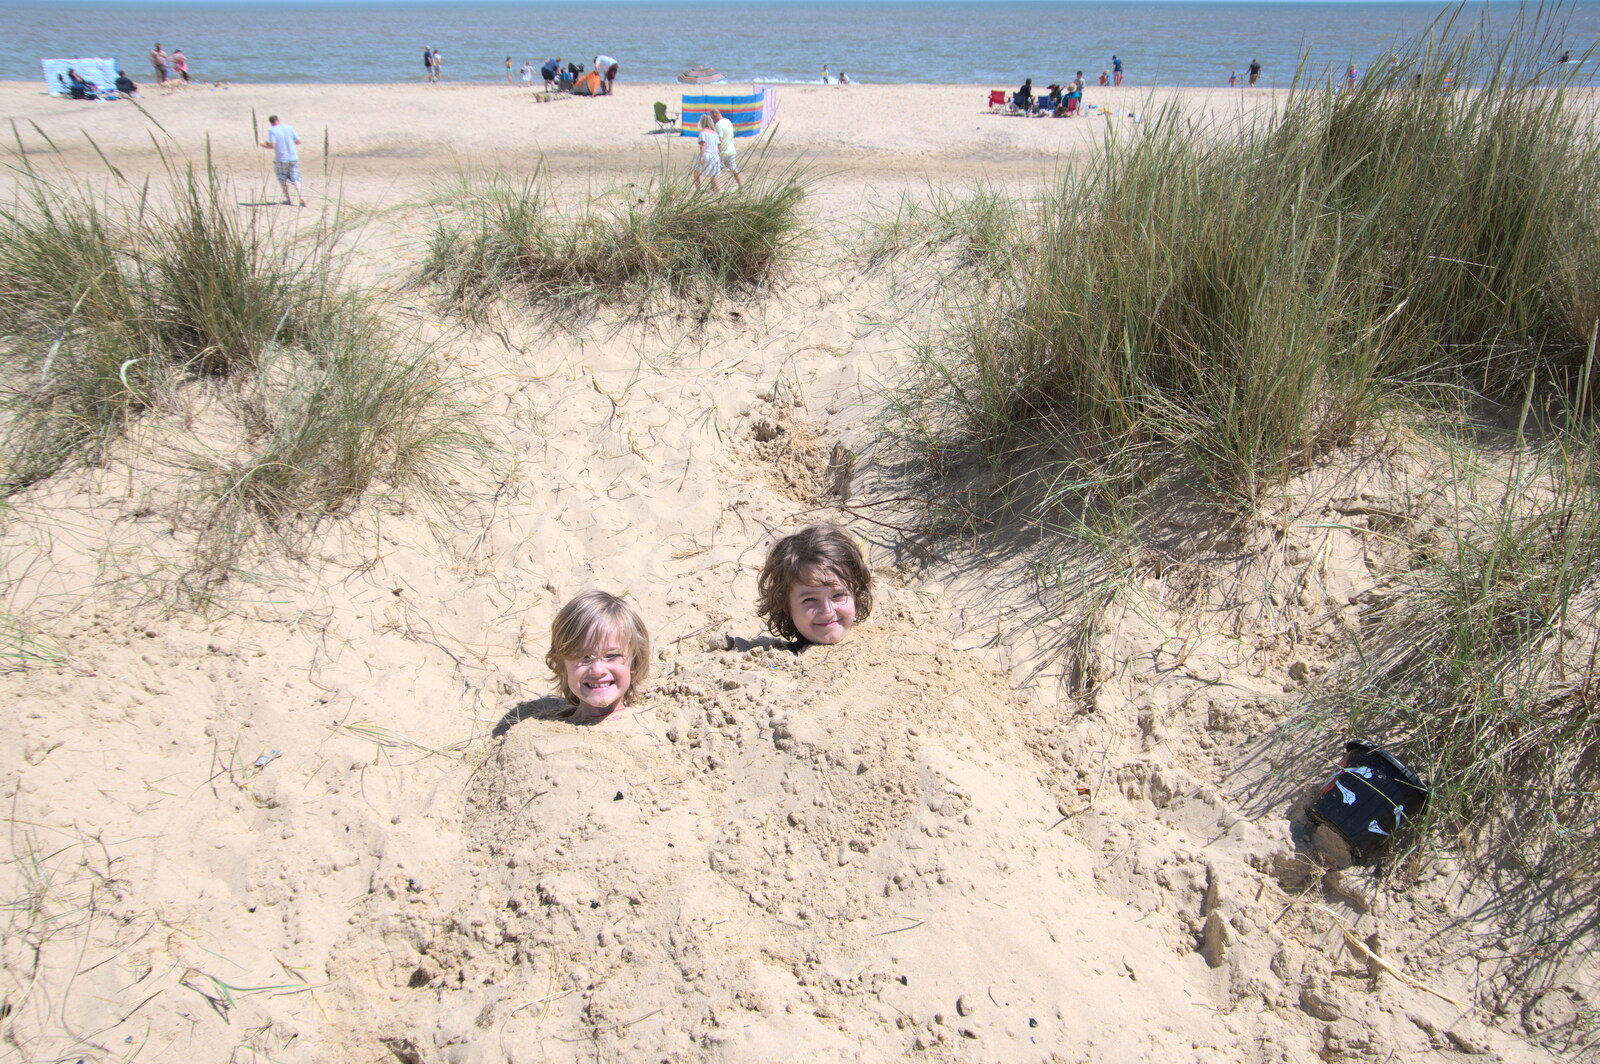 The boys get buried in sand from A Return to Southwold, Suffolk - 14th June 2020